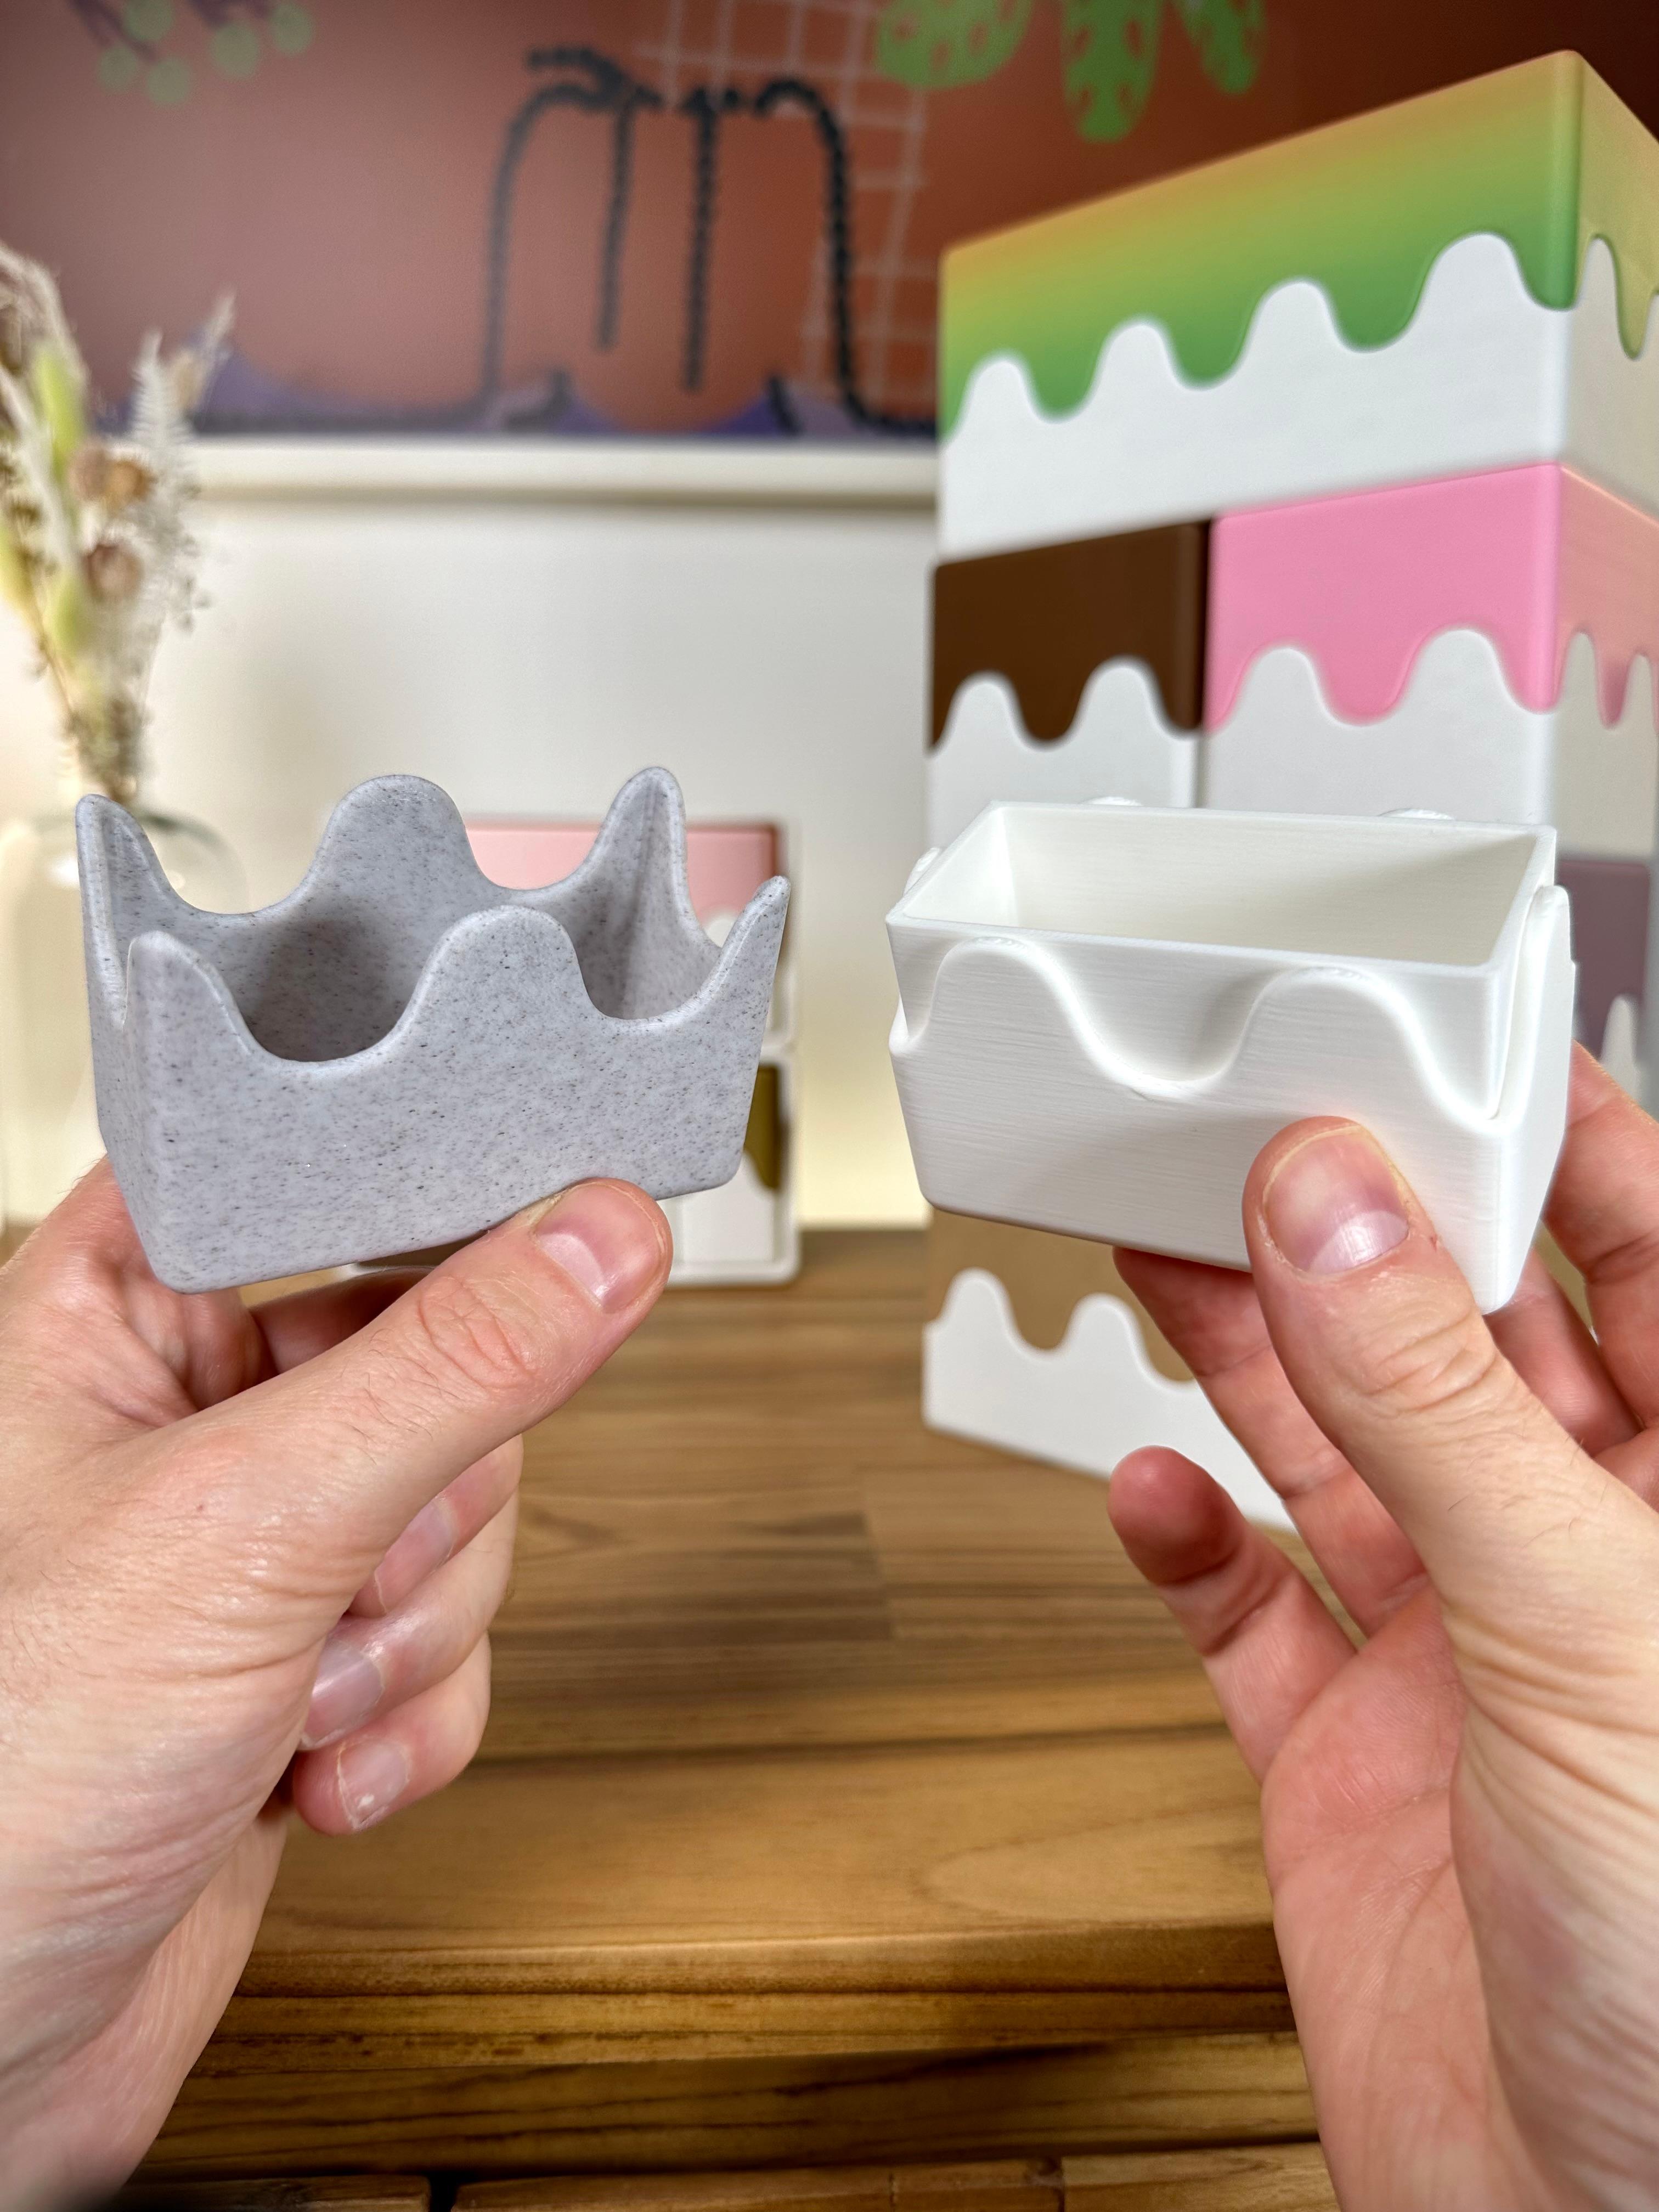 The Wavy Boxes - Cute Stackable Organizers 3d model